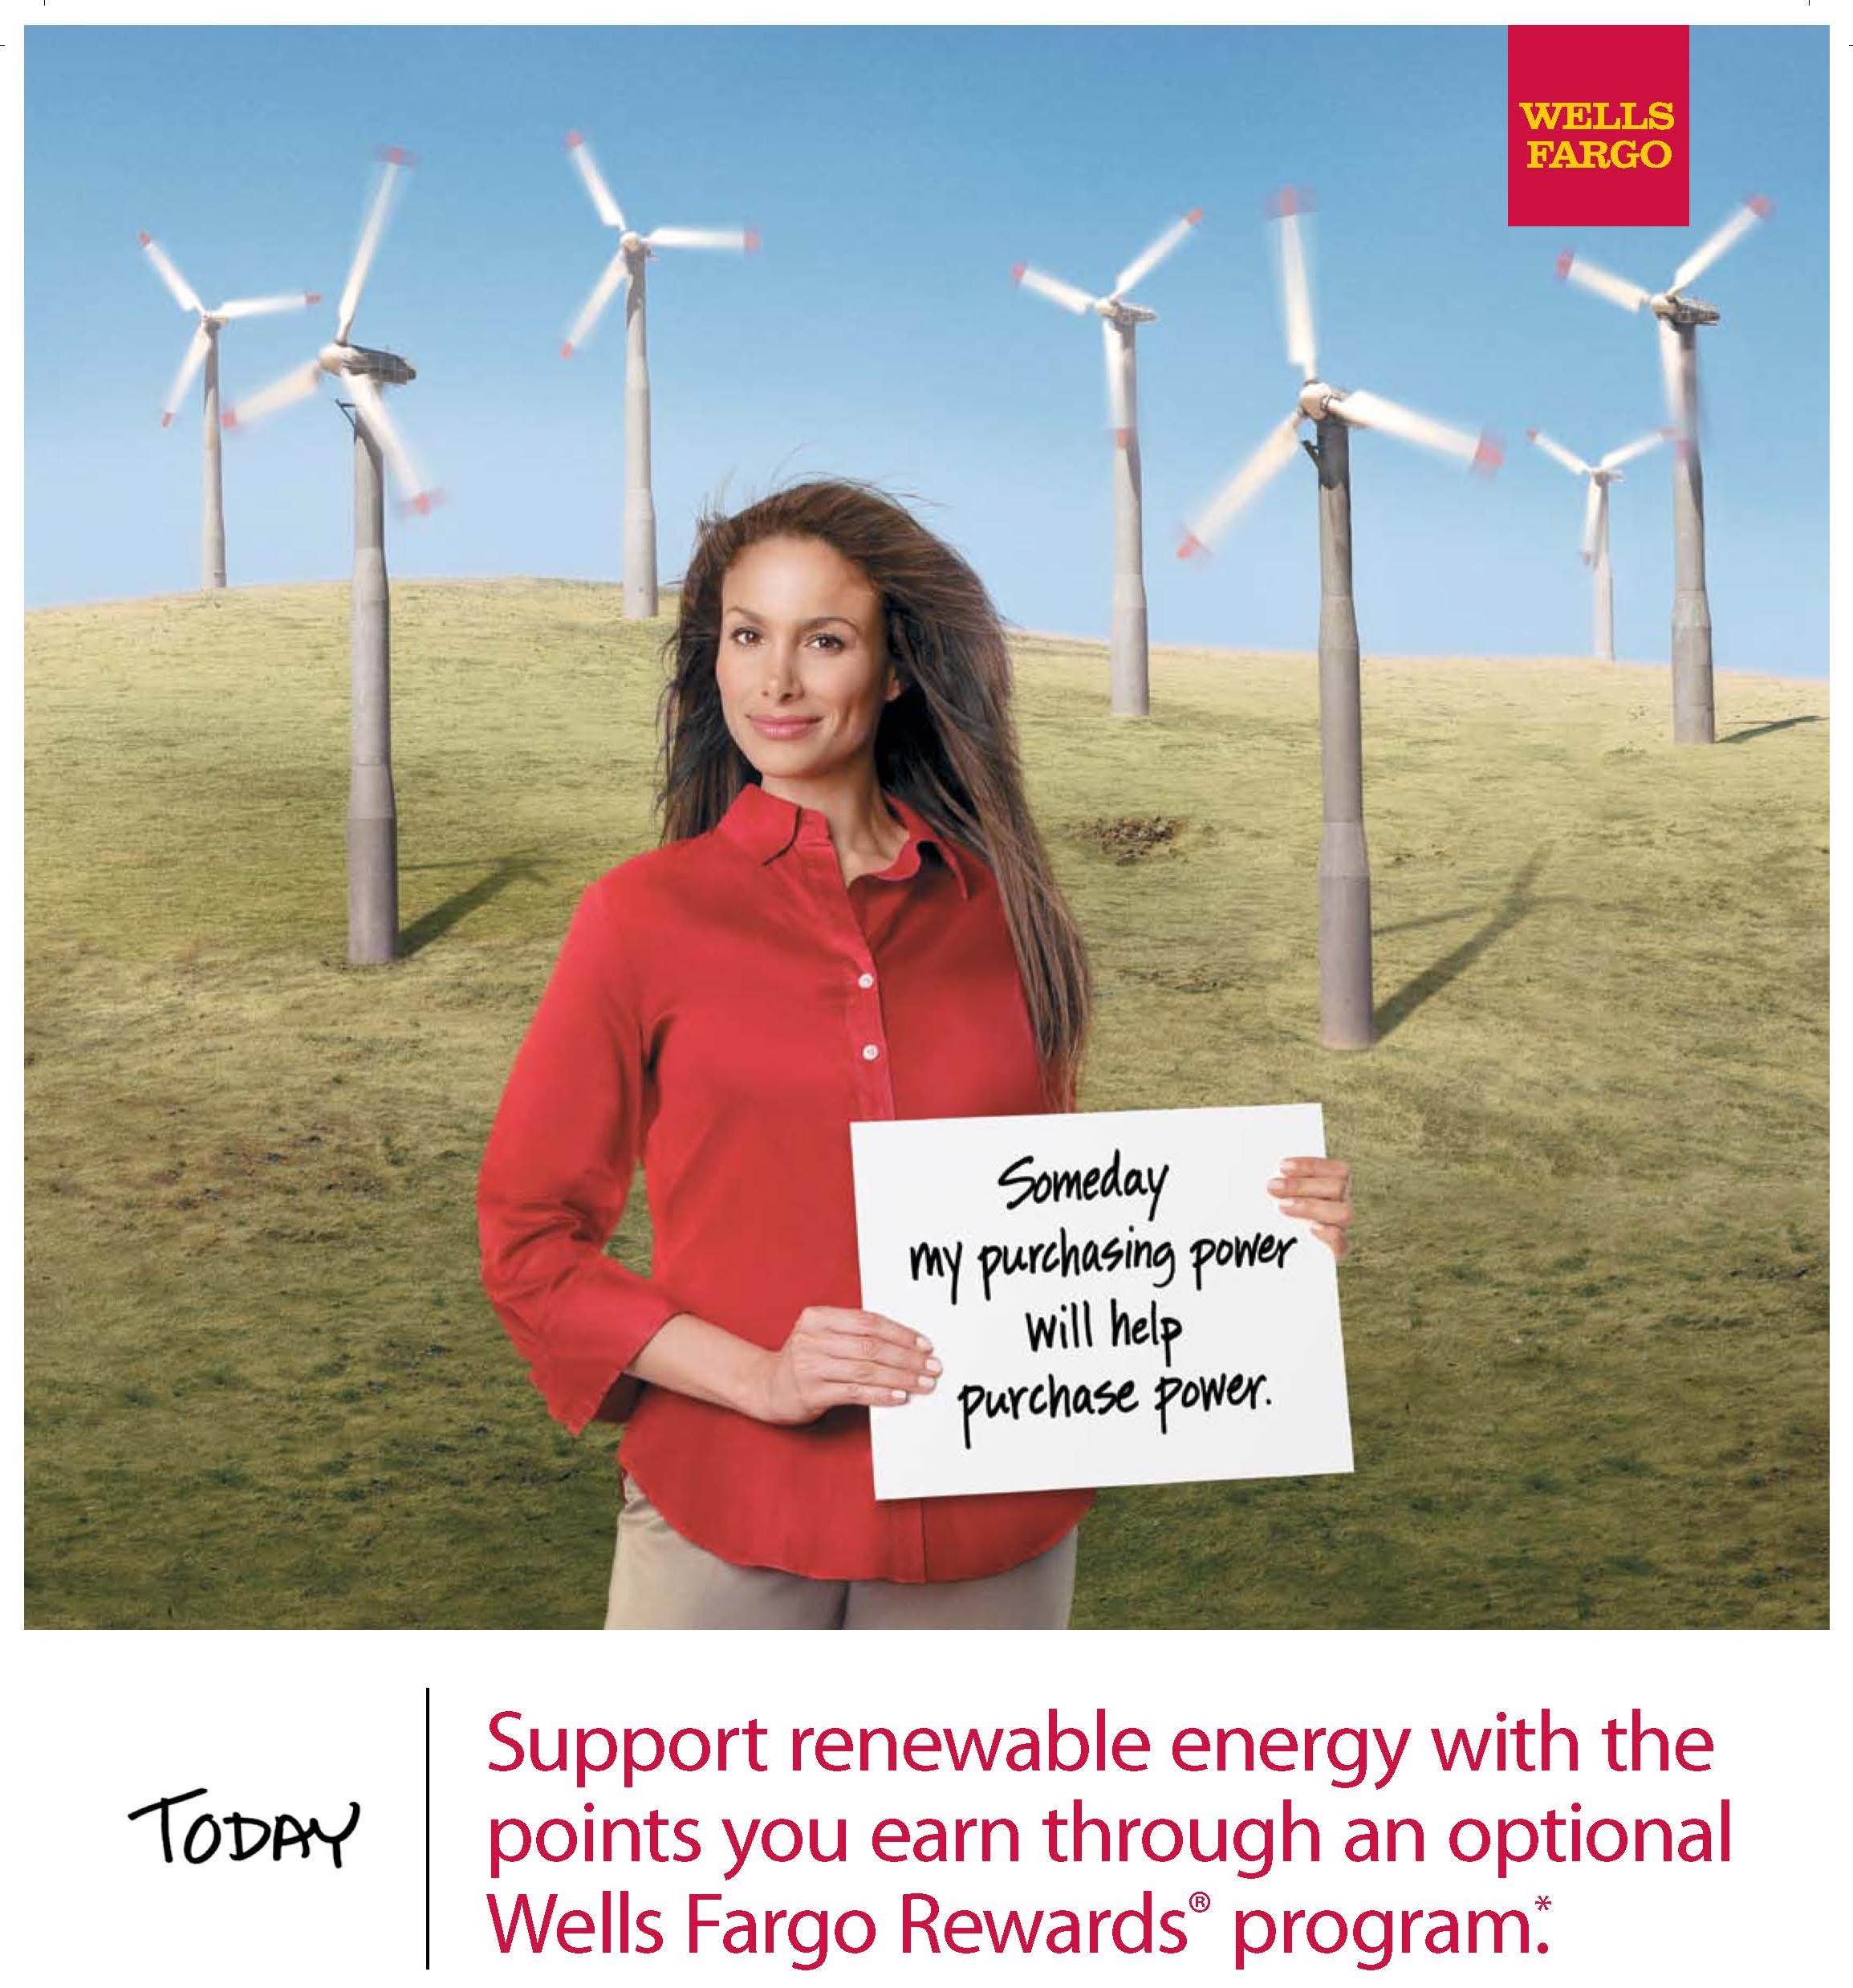 Ad with woman standing in field of windmills holding placard reading Someday my purchasing power will help purchase power. Ad copy below reads Today Support renewable energy with the points you earn through an optional Wells Fargo Rewards program. Image is color.